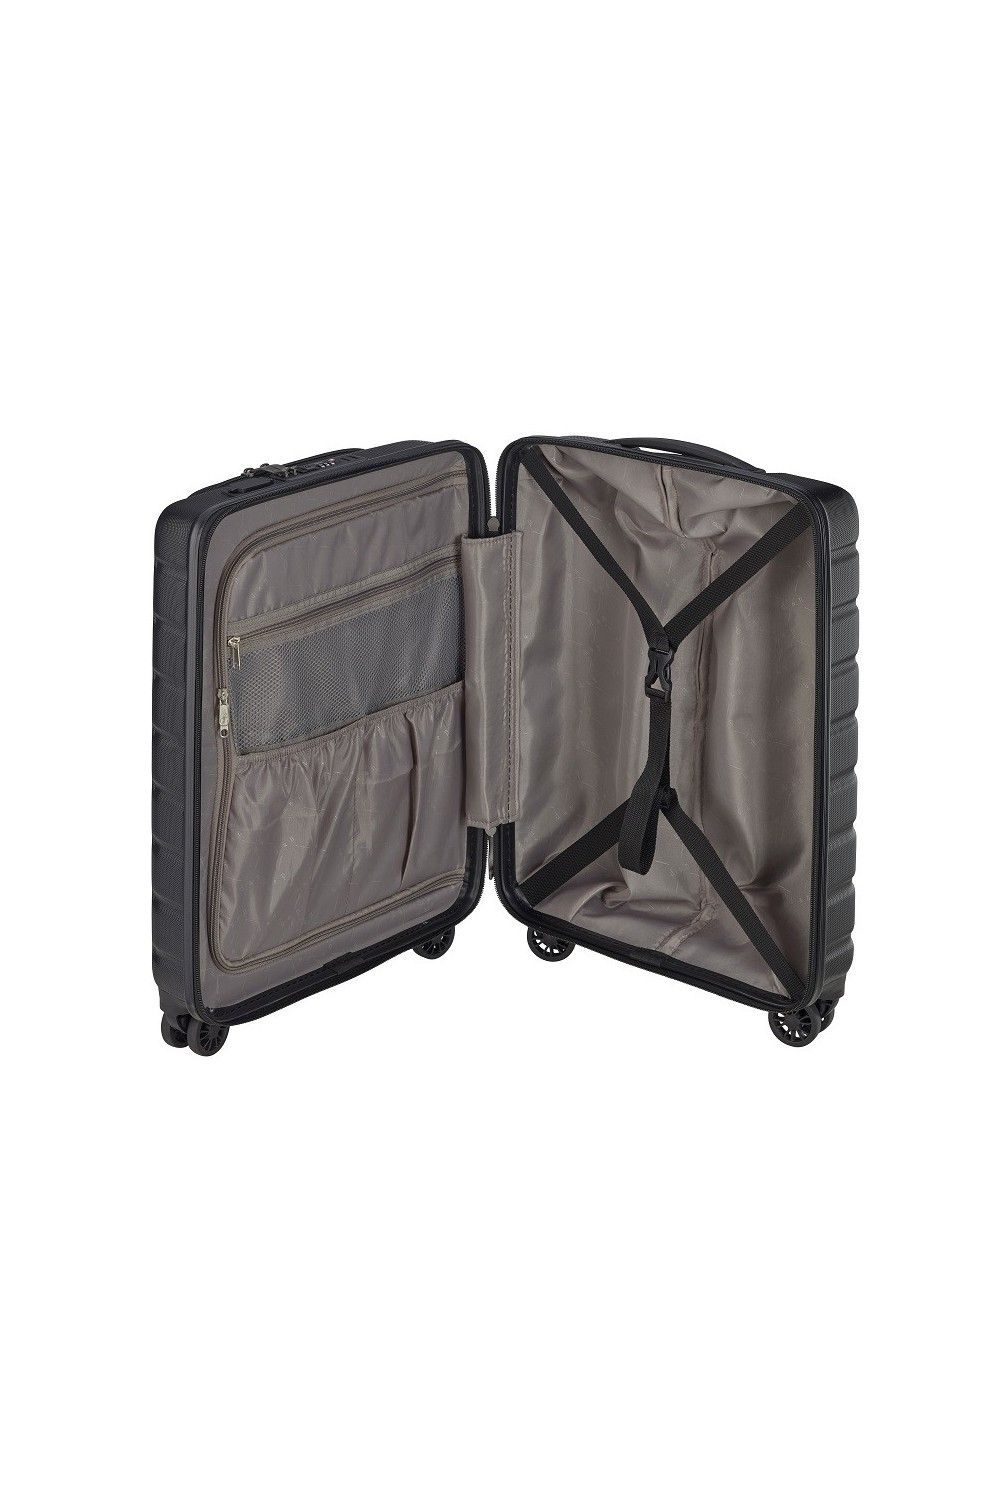 DN hand luggage 55 cm S 4 wheel front compartment